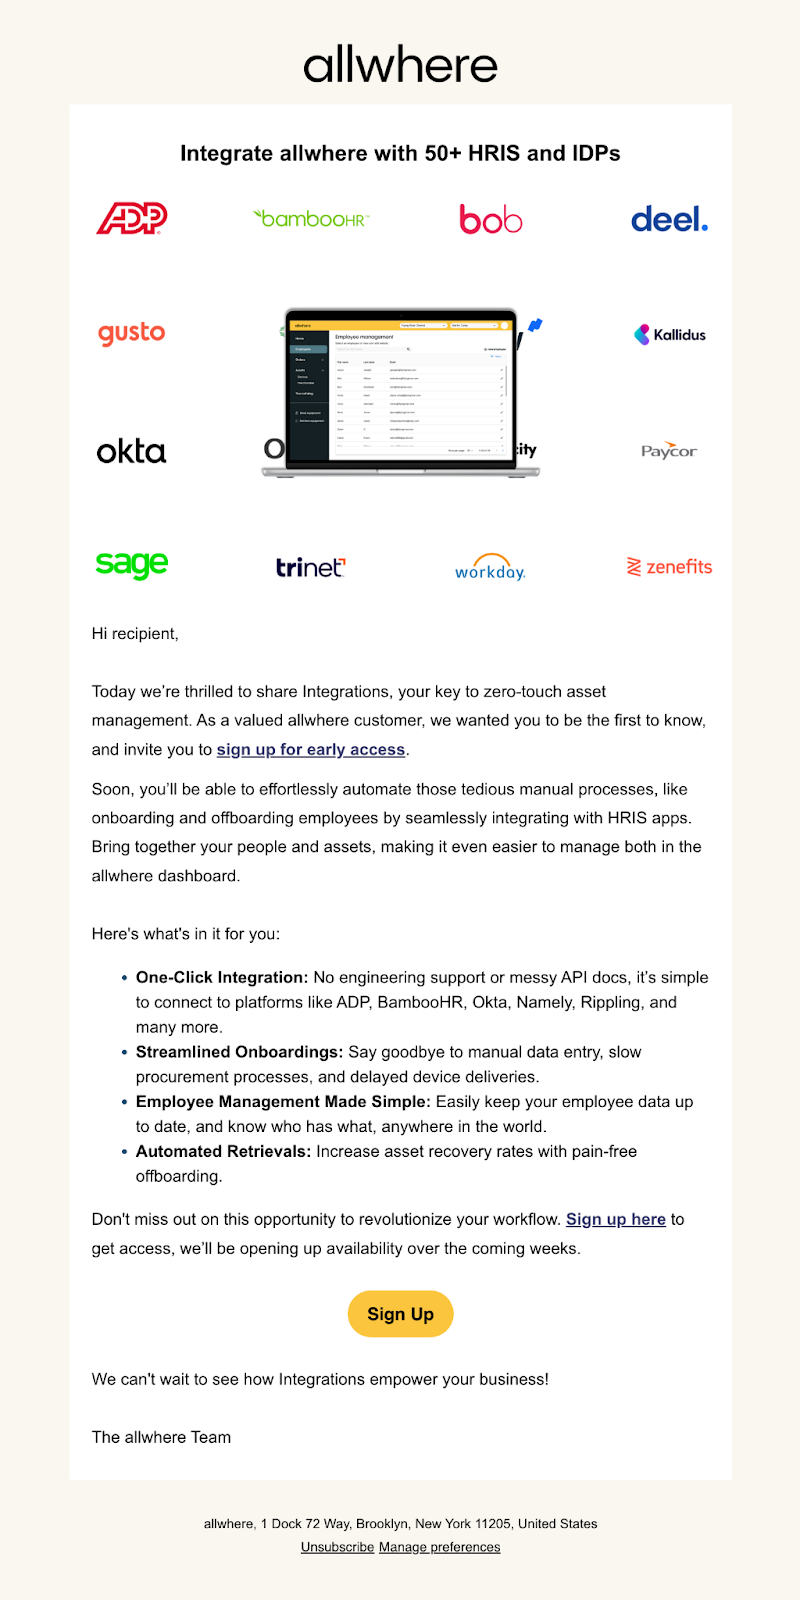 Email from allwhere that announces their integrations